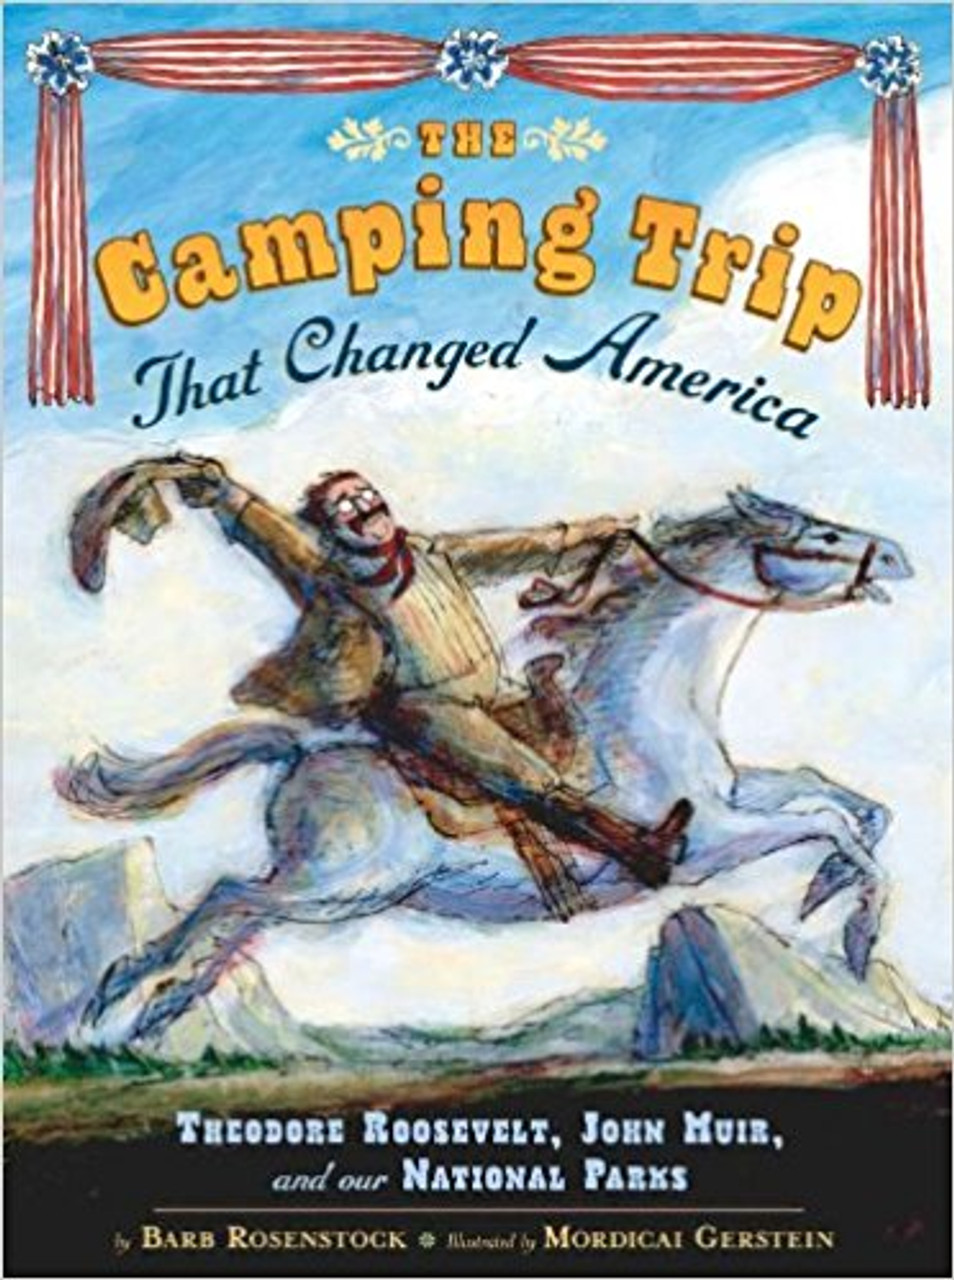 The Camping Trip That Changed America by Barb Rosenstock